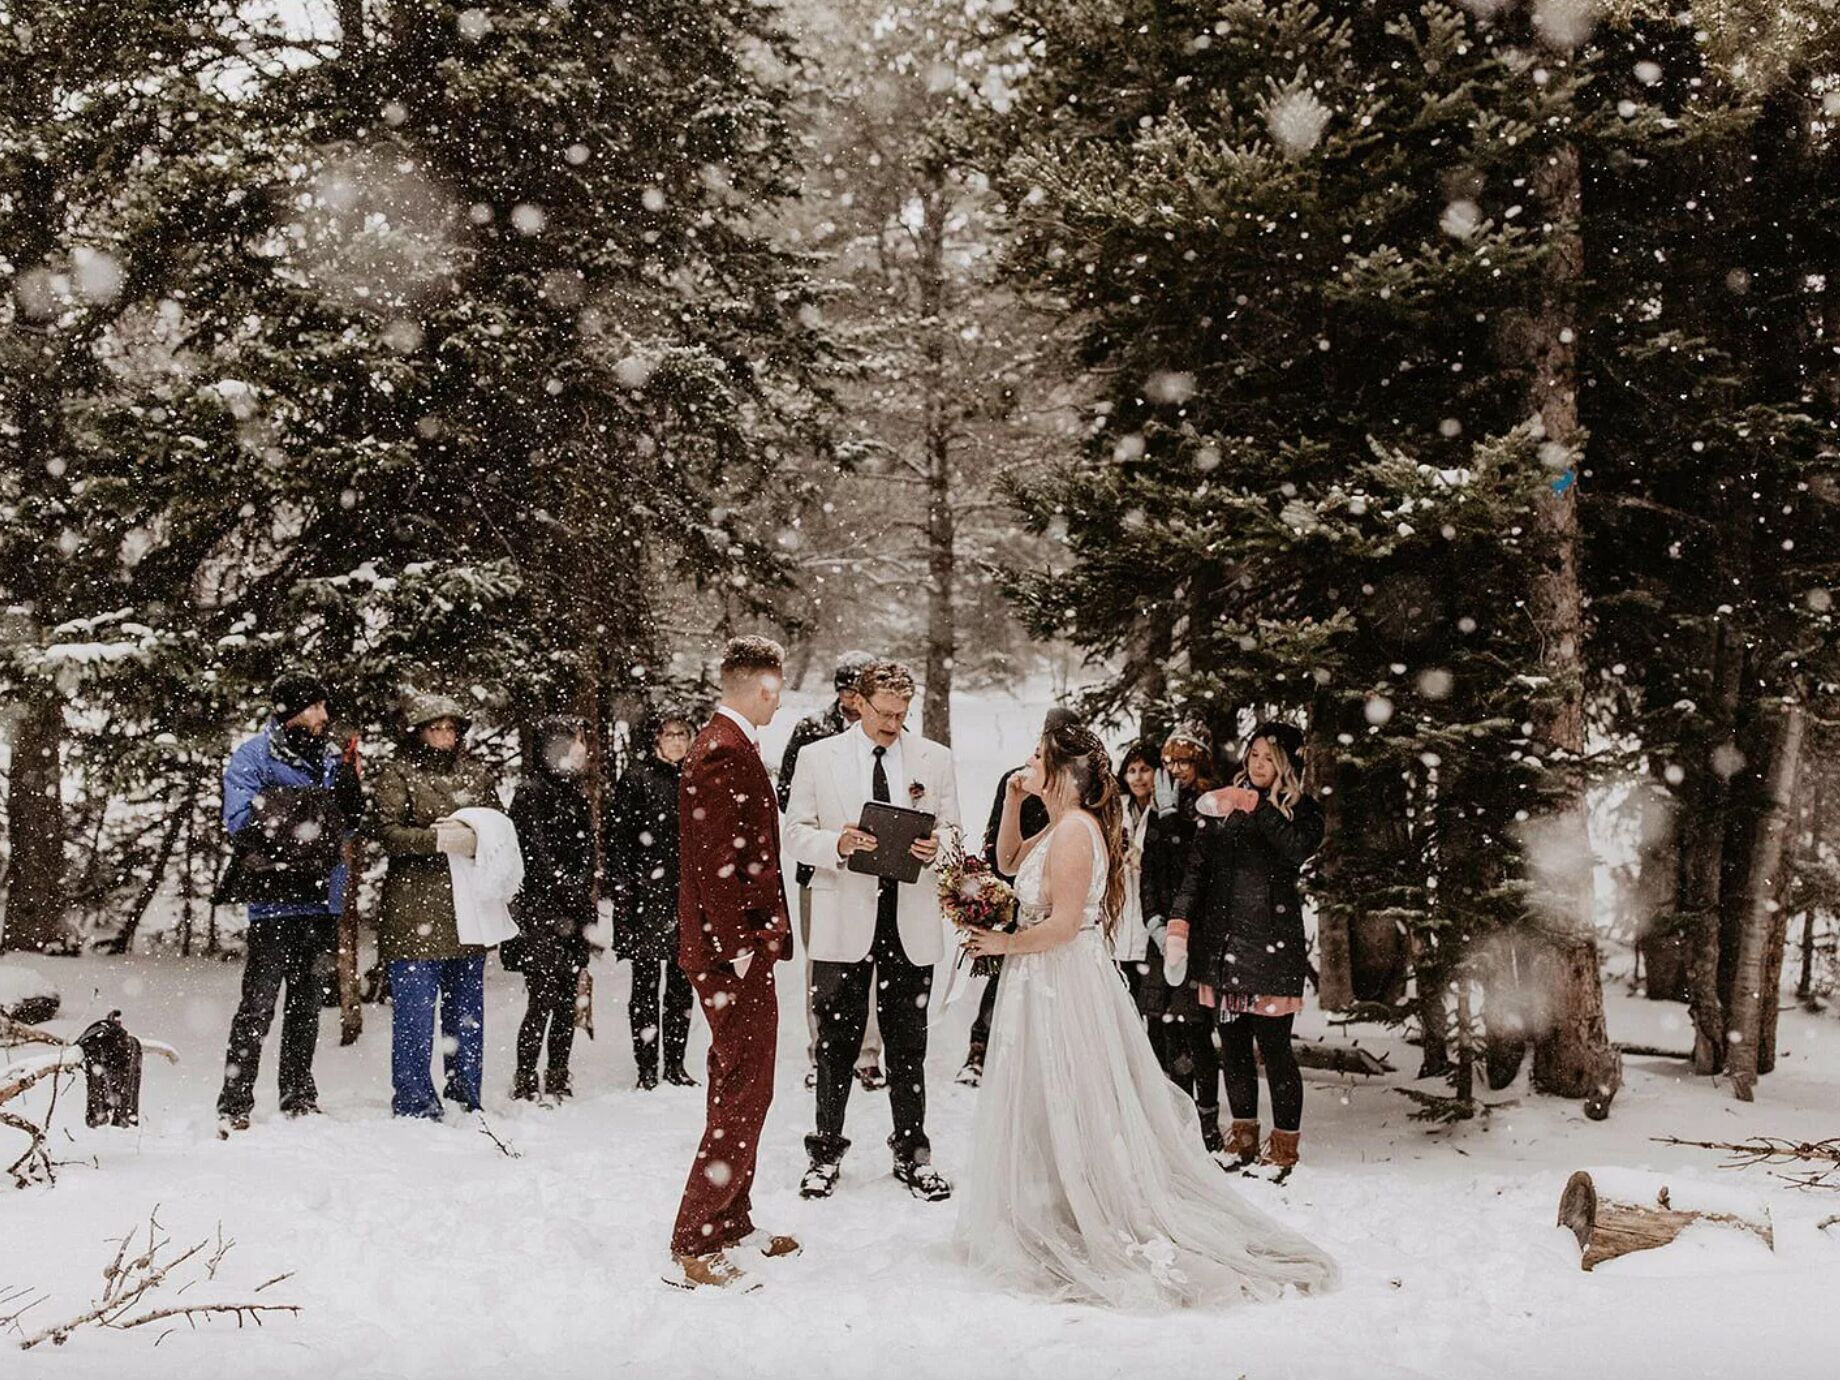 Winter Wedding Ideas That Are Cozy and Chic